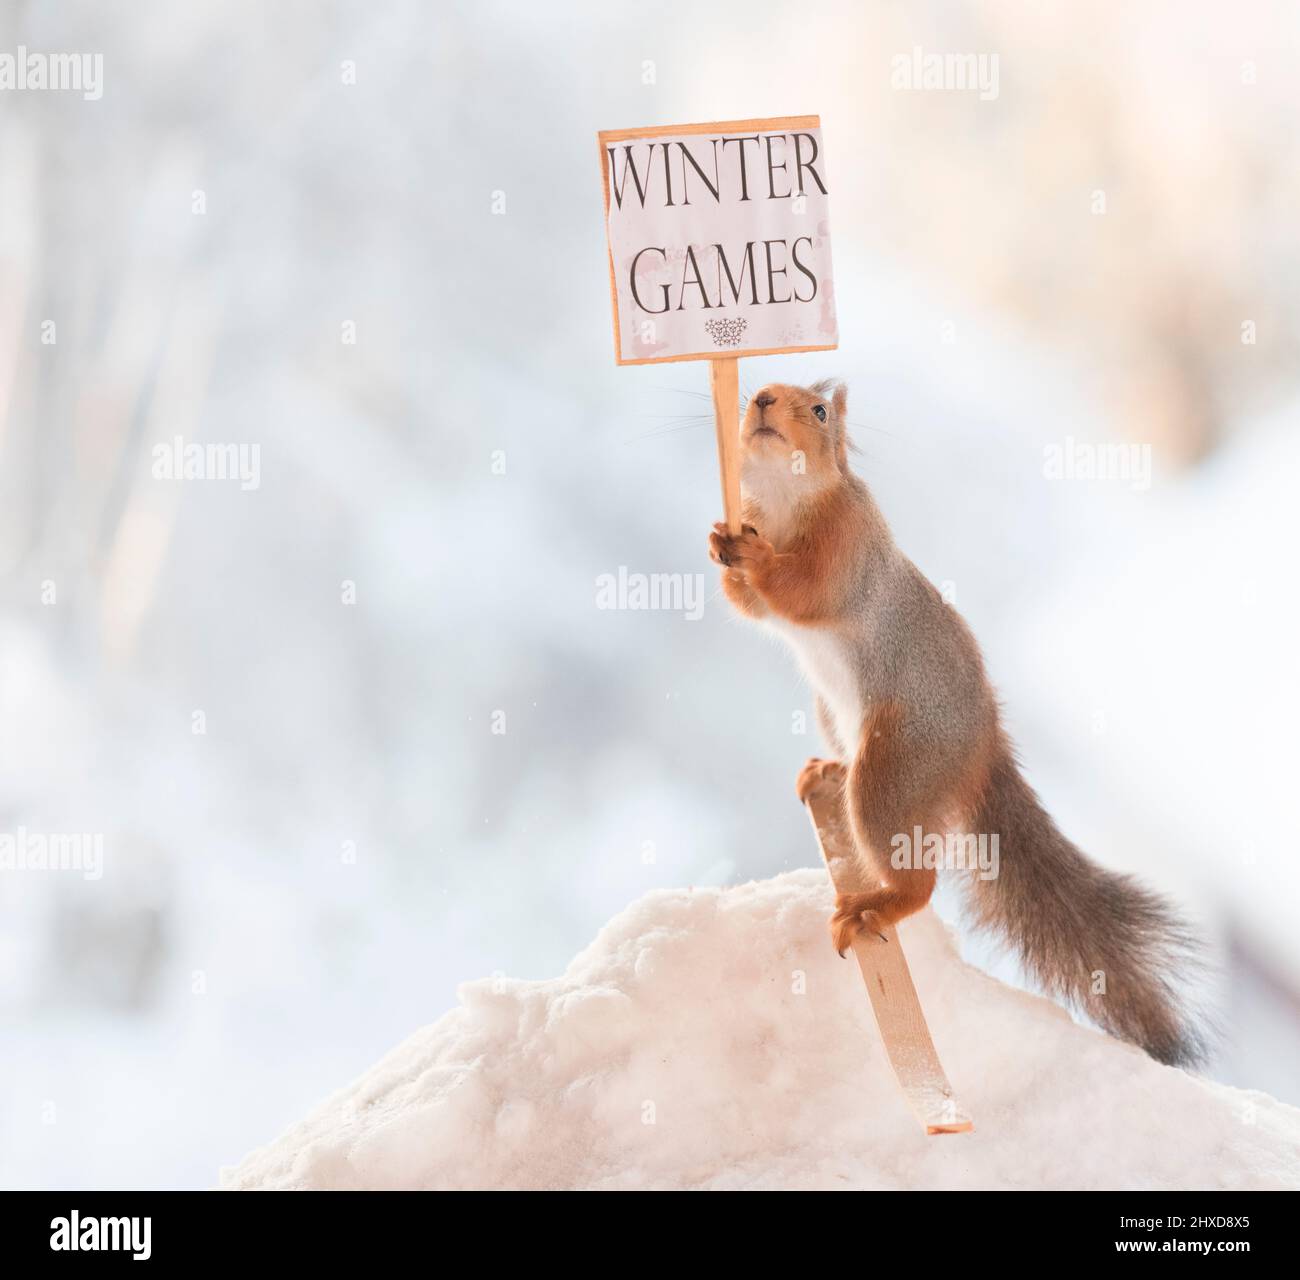 red squirrel on ski holding a sign with winter games text Stock Photo